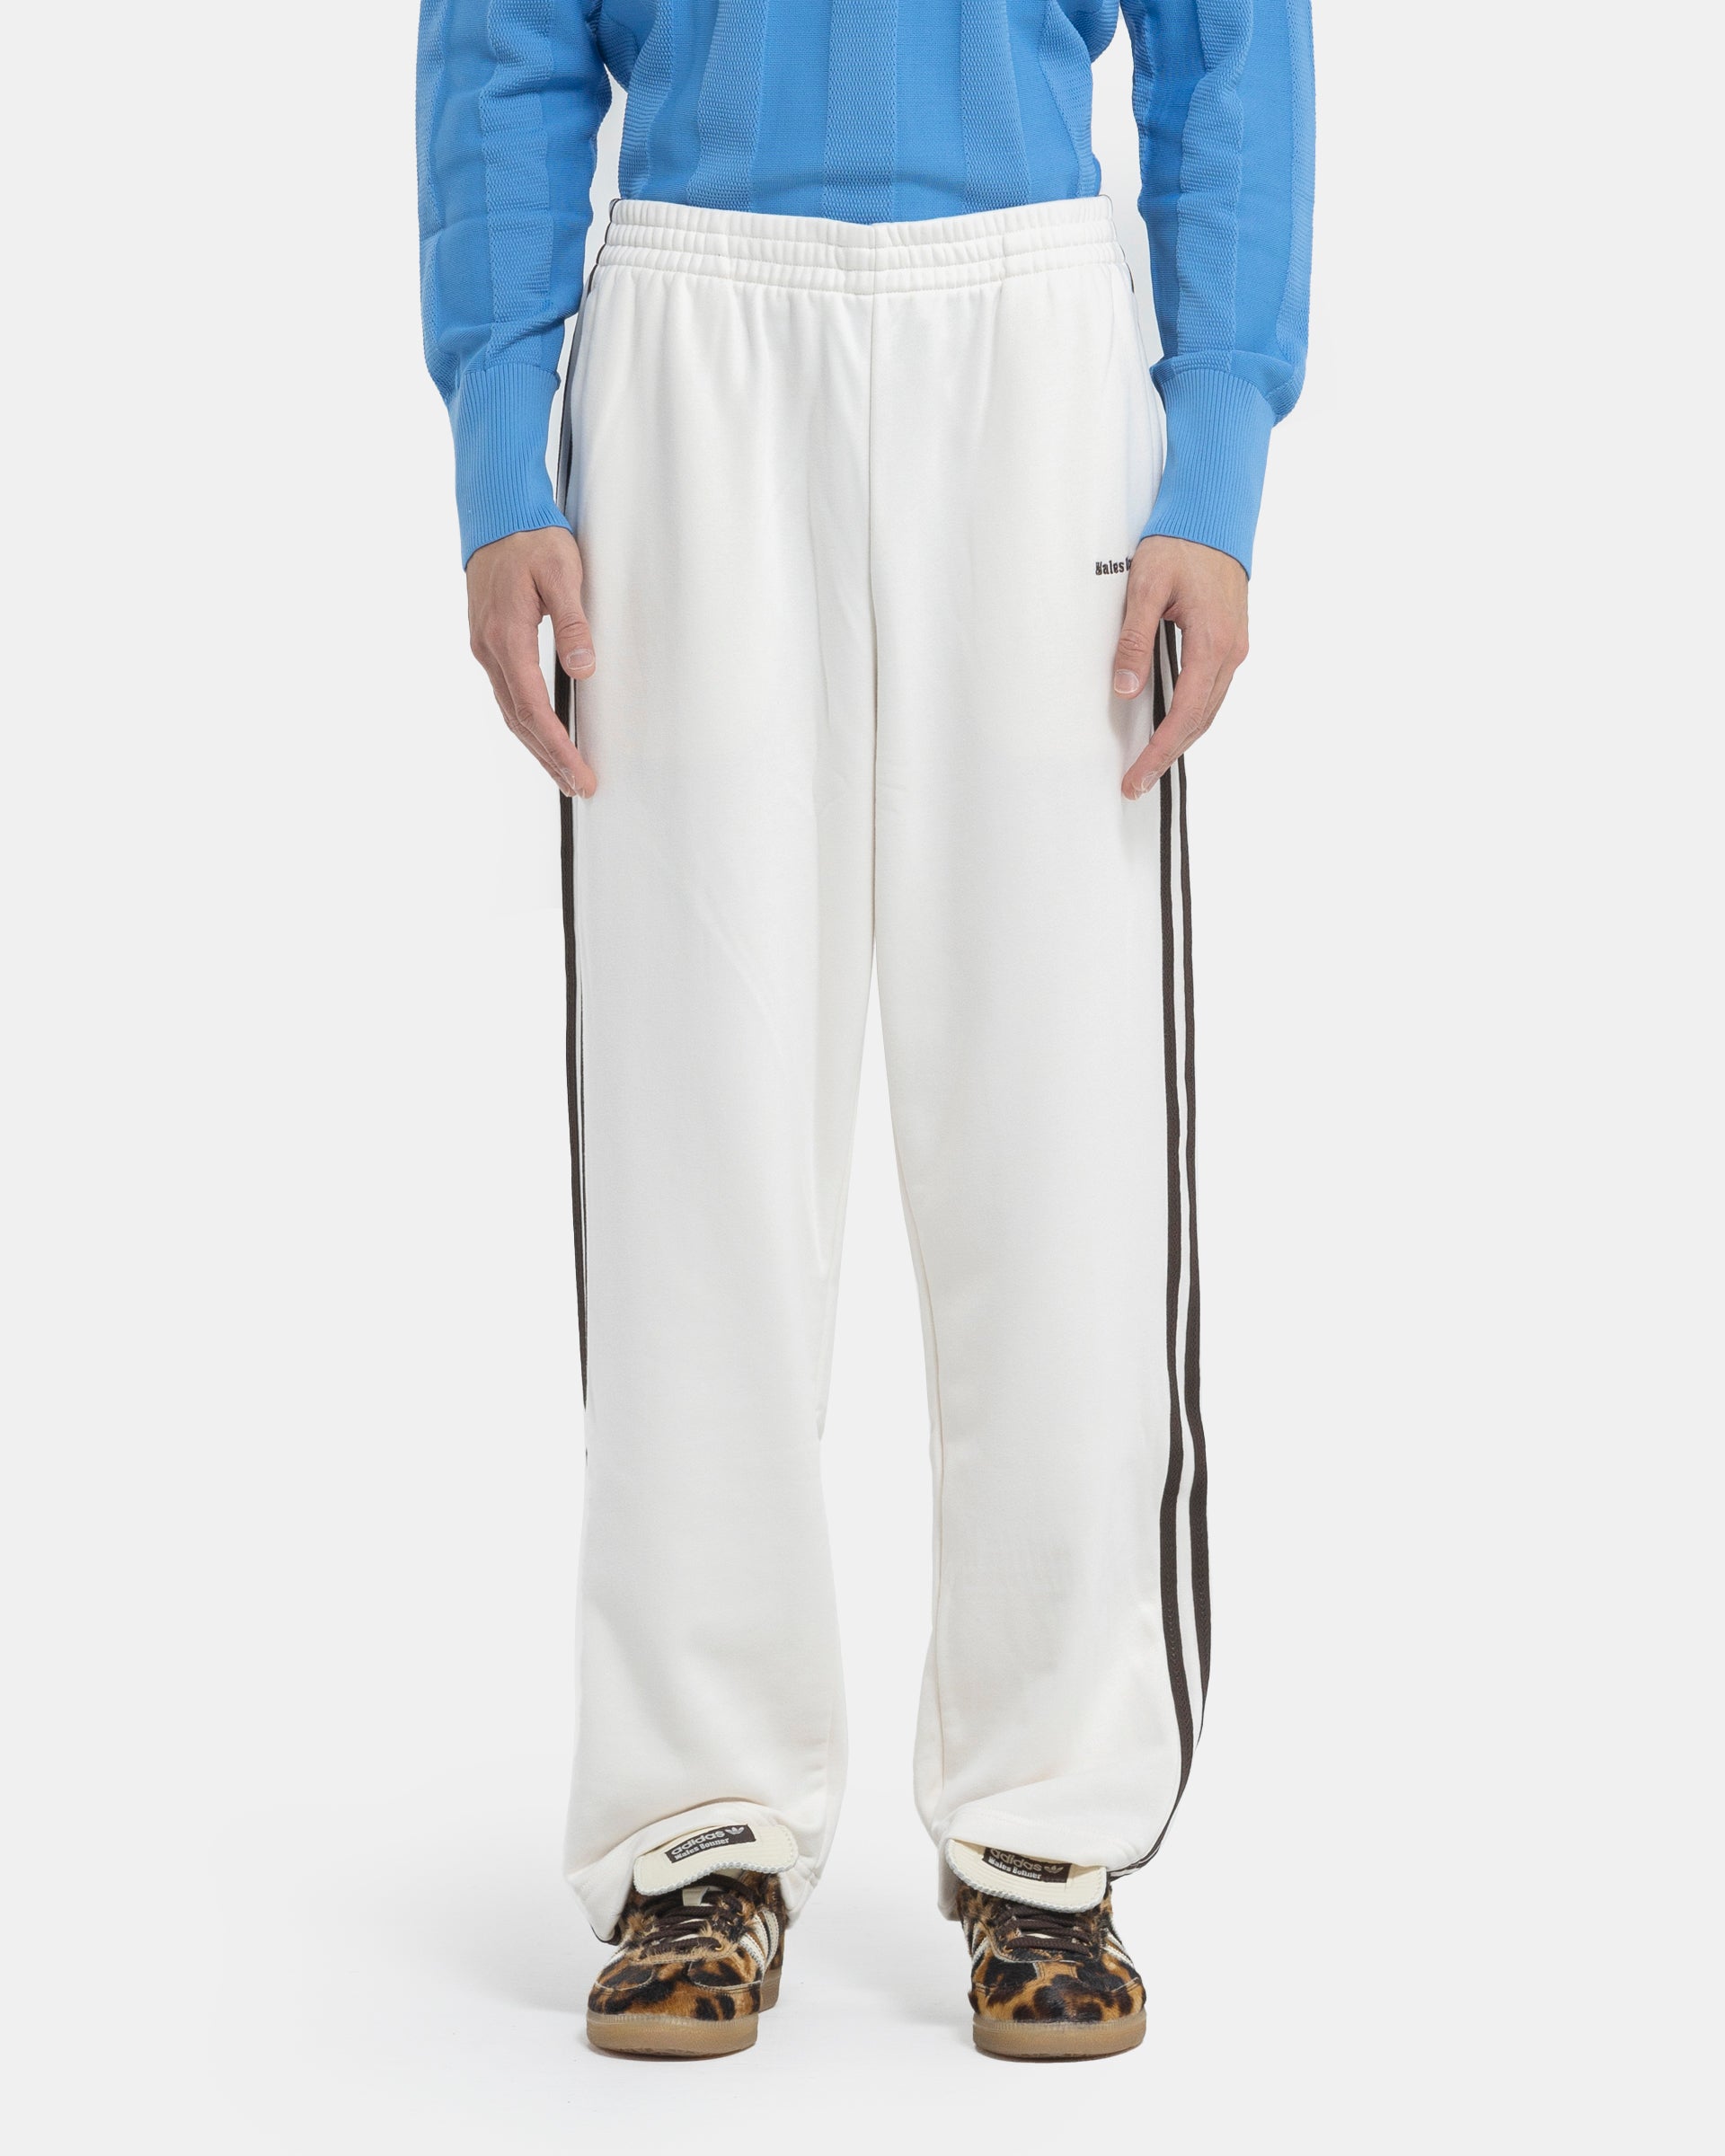 Wales Bonner Statement Trackpant in Chalk White